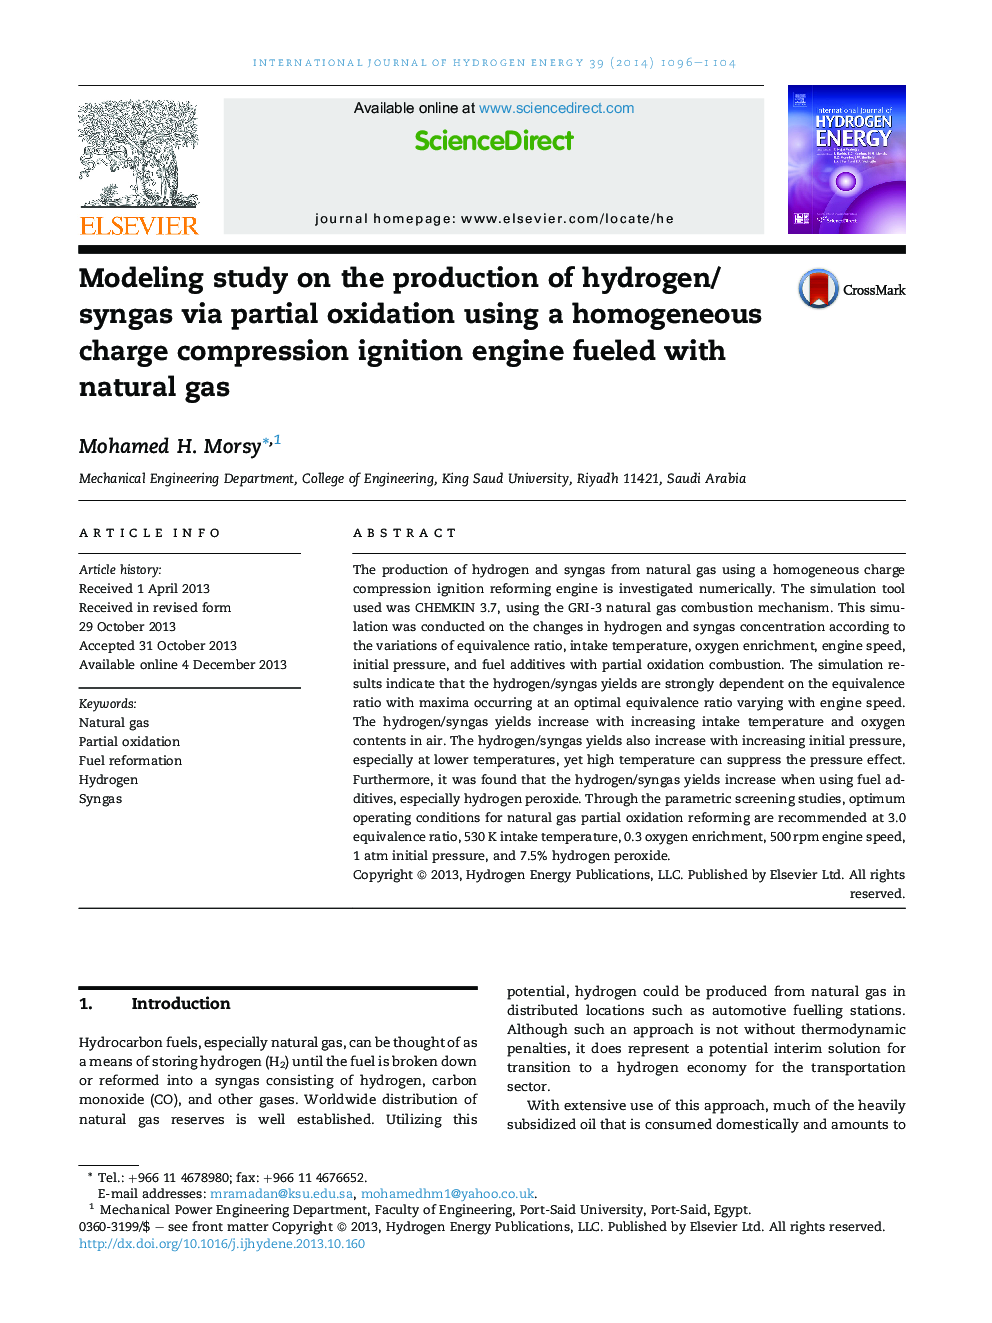 Modeling study on the production of hydrogen/syngas via partial oxidation using a homogeneous charge compression ignition engine fueled with natural gas